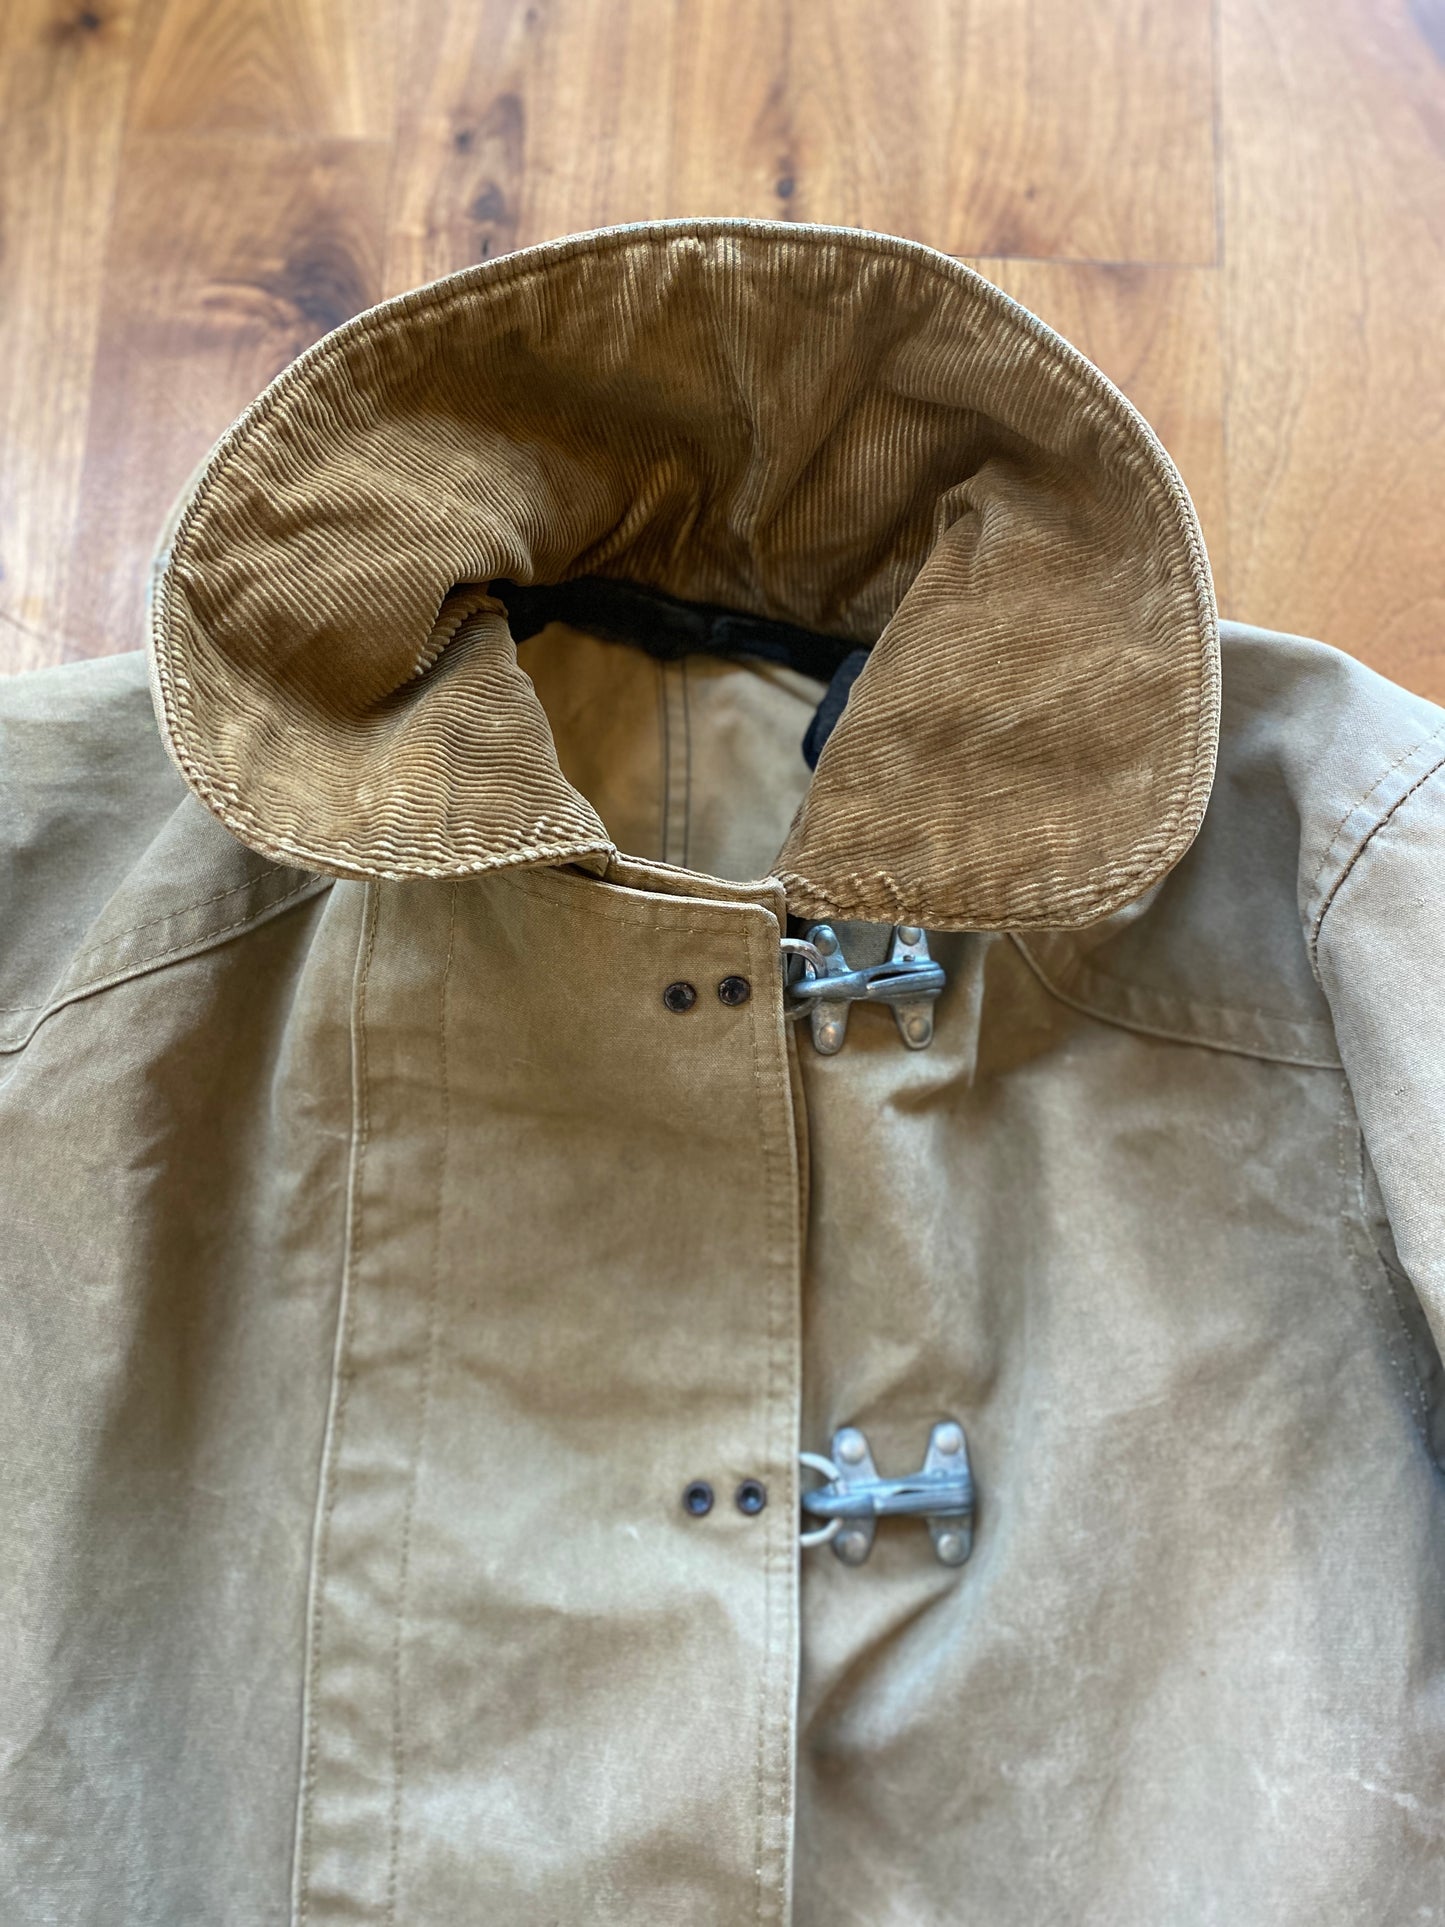 1950s Janesville Apparel Union Made Fire Coat Size 44